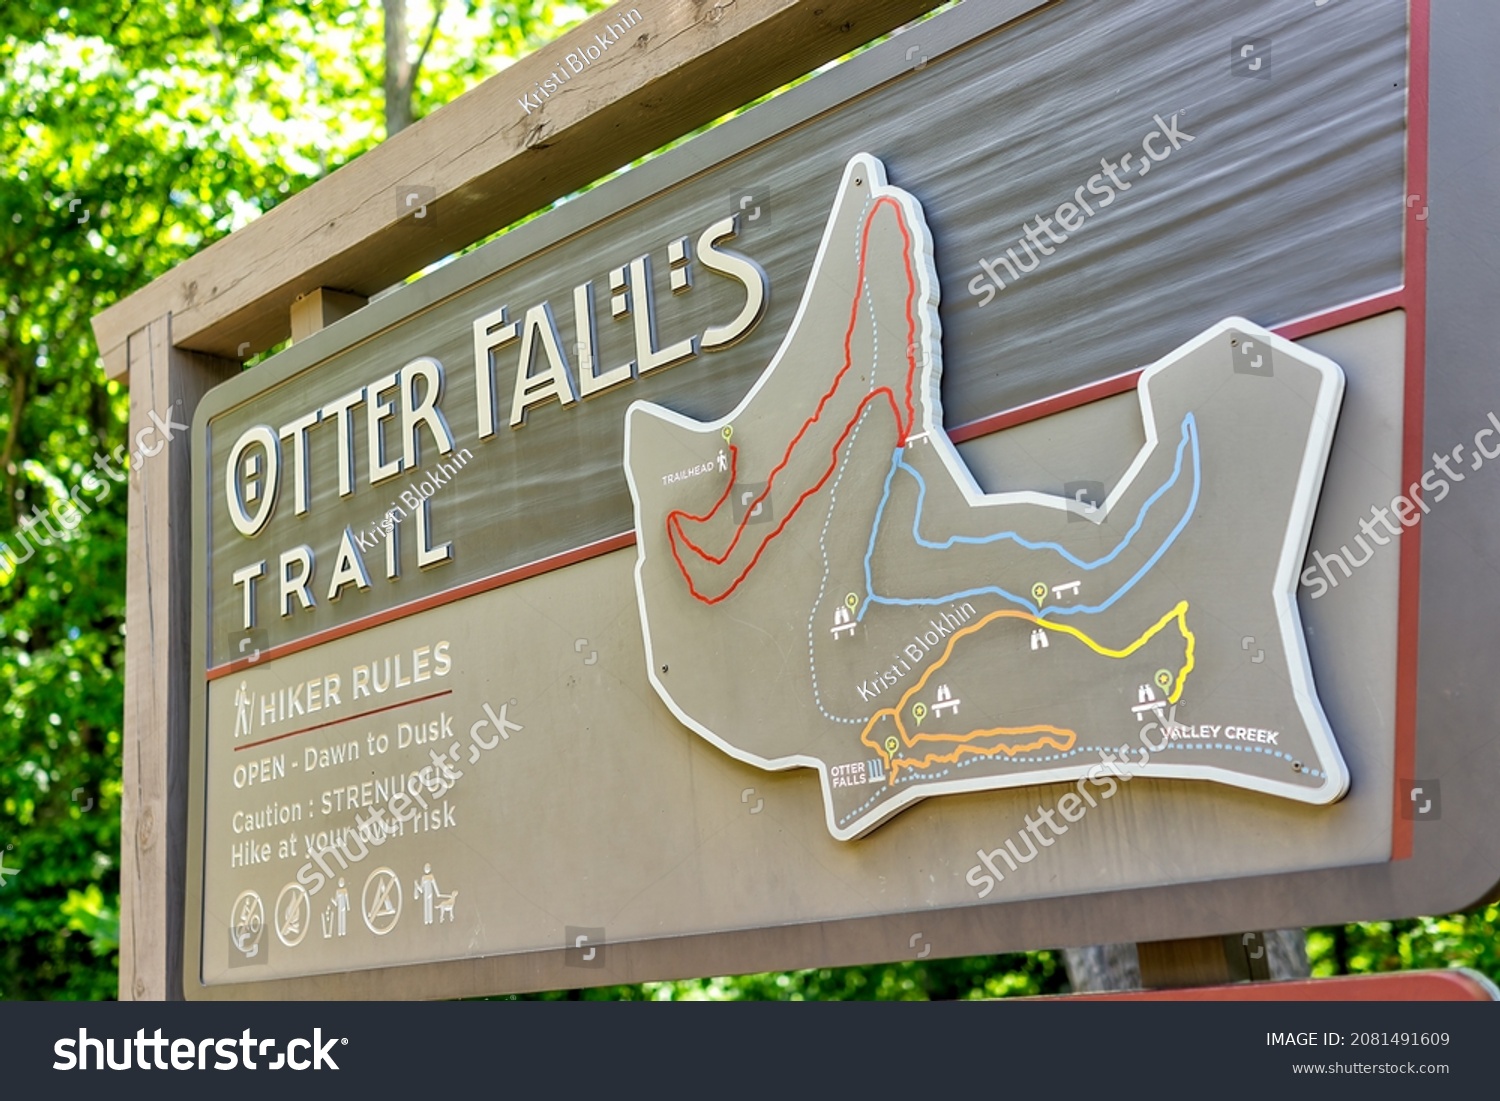 Otter Falls Trail Map Strenuous Trail Images, Stock Photos & Vectors | Shutterstock